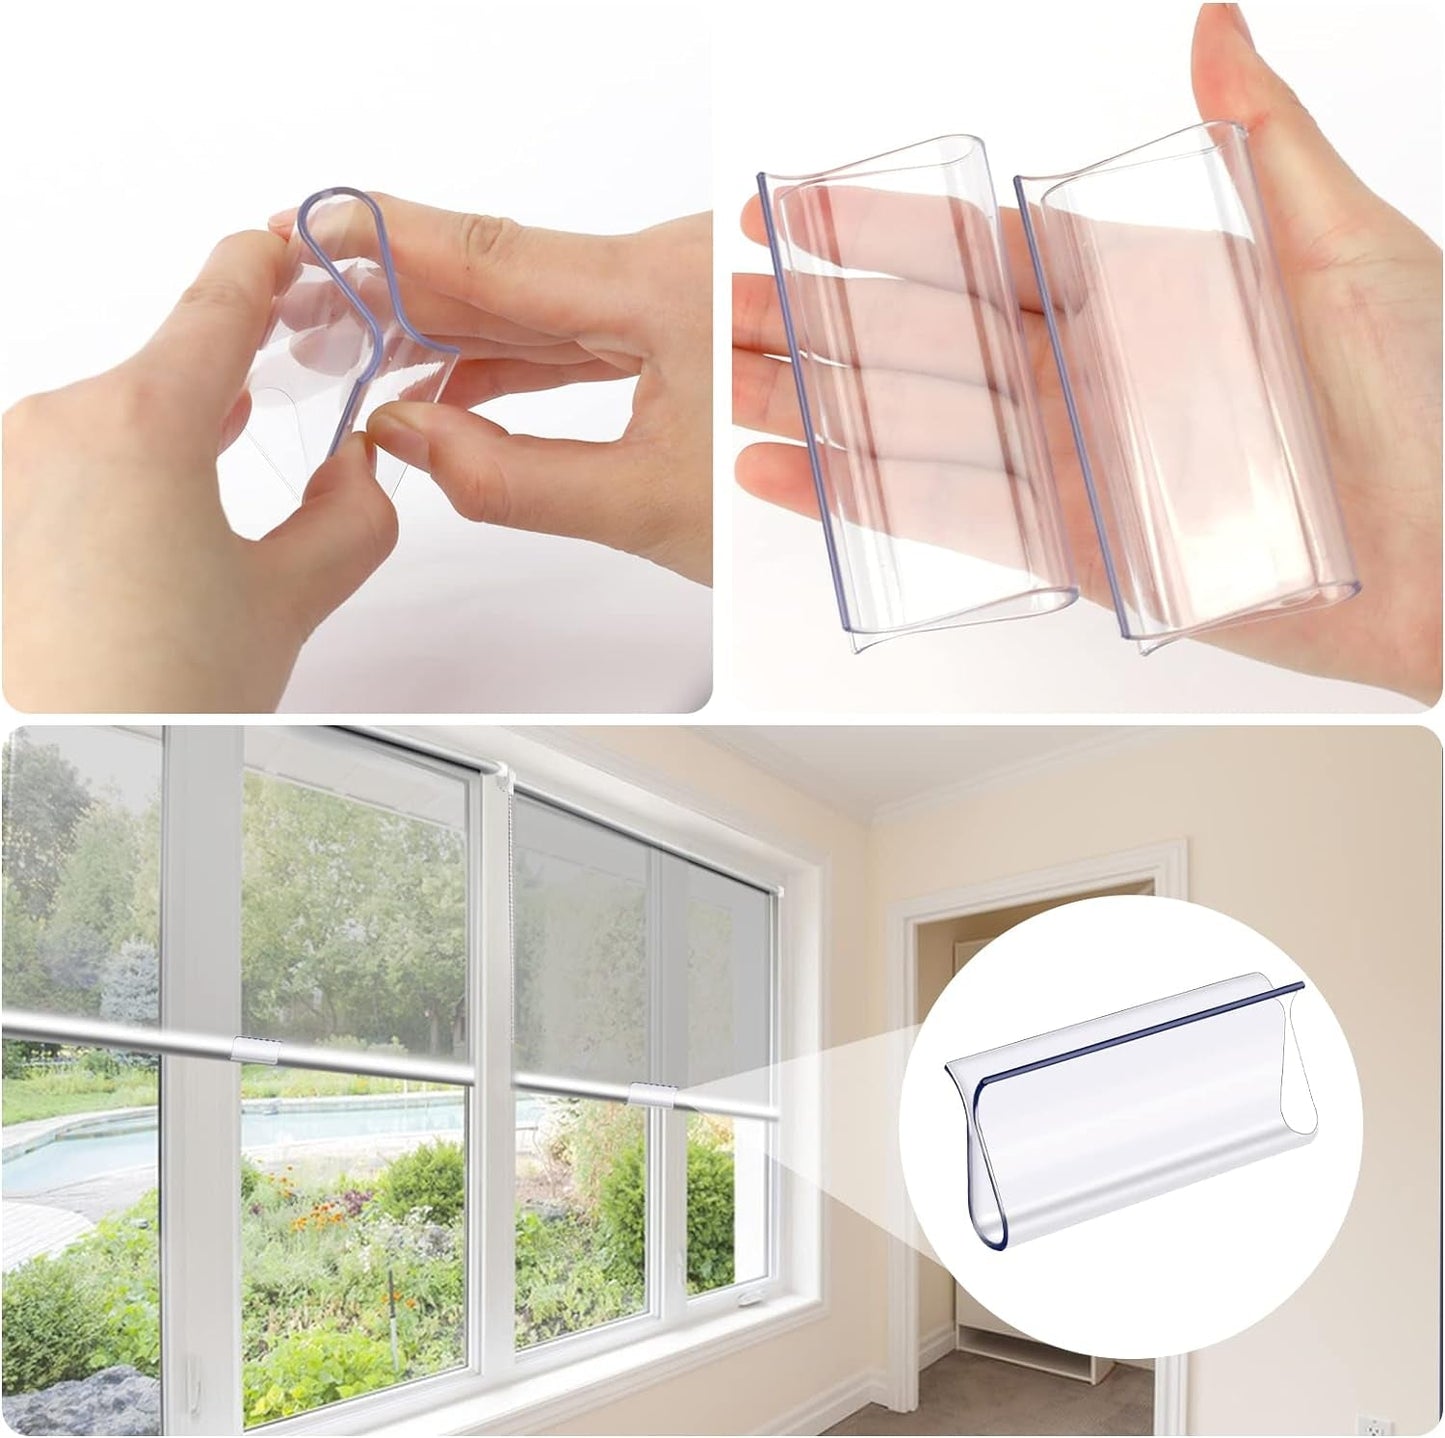 4 PCS Roller Window Shades Window Shade Clear Plastic Hem Grip for Roller Shades Pull down Shades Blinds for Windows Home Accessories